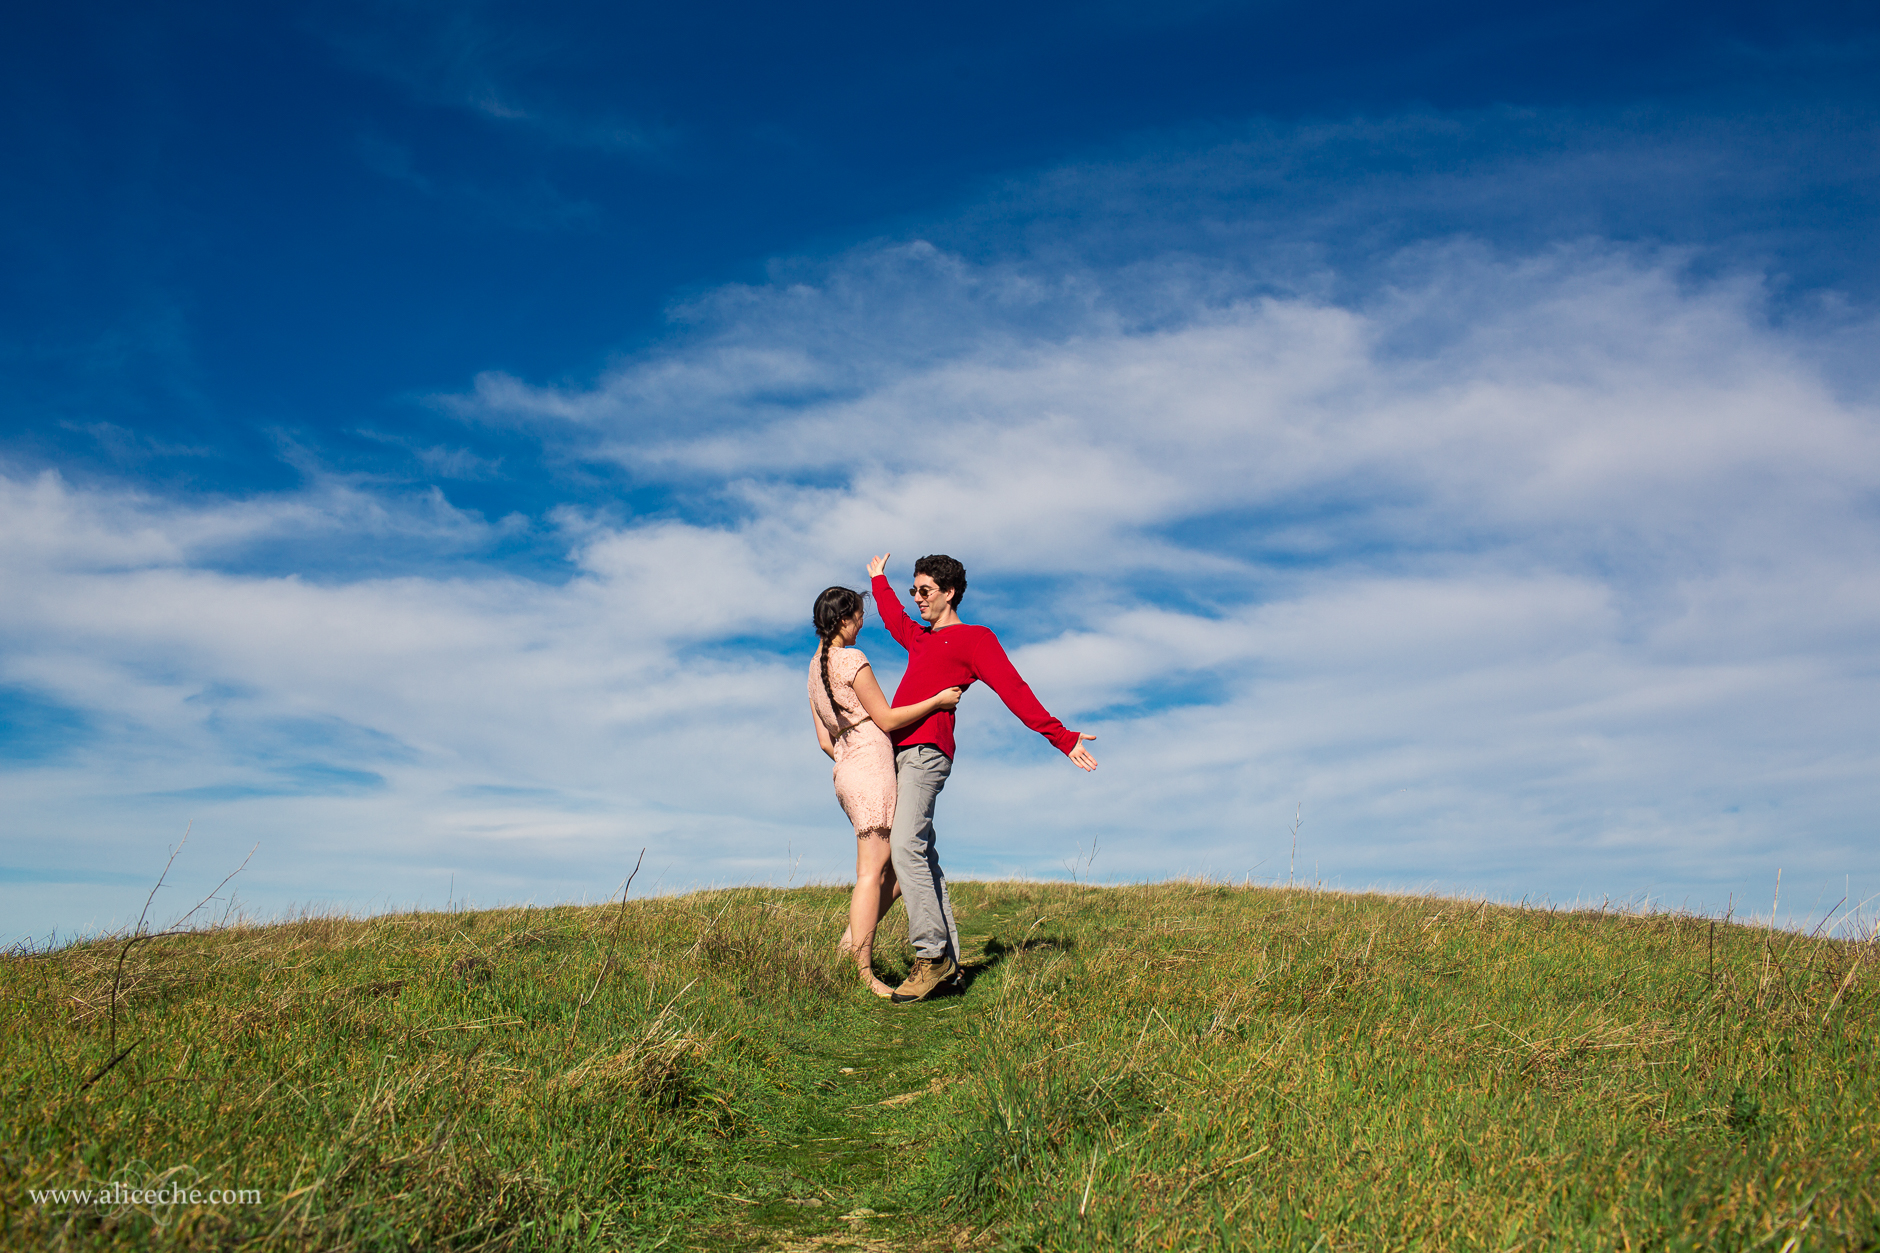 alice-che-photography-russian-ridge-picnic-bay-area-engagement-photographer-silly-windmill-arms